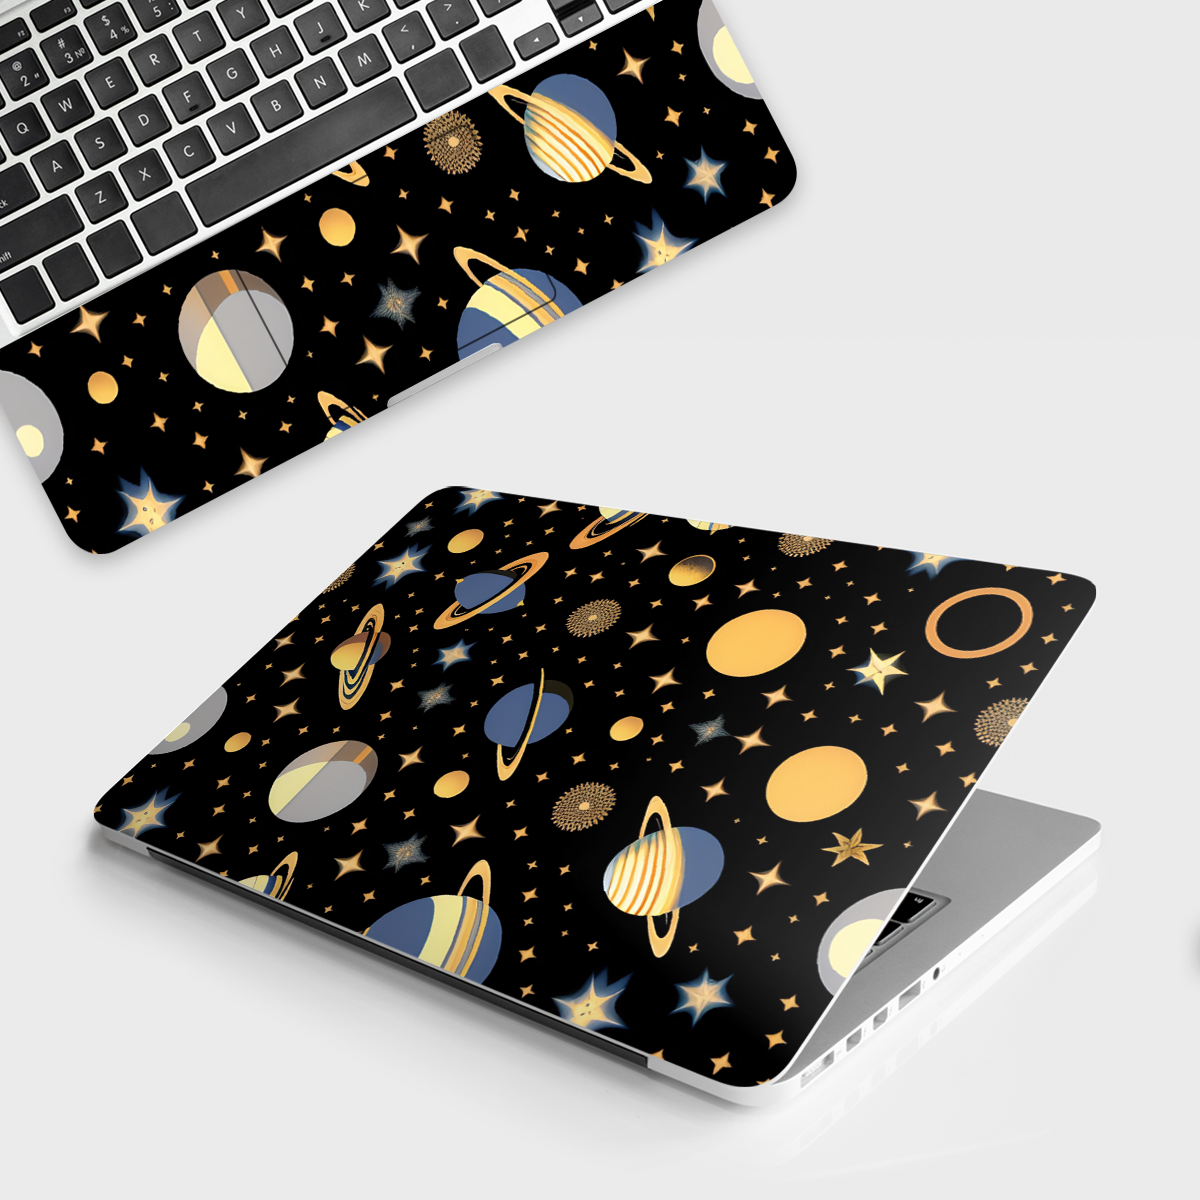 Fomo Store Laptop Skins Abstract Planet Stars Pattern